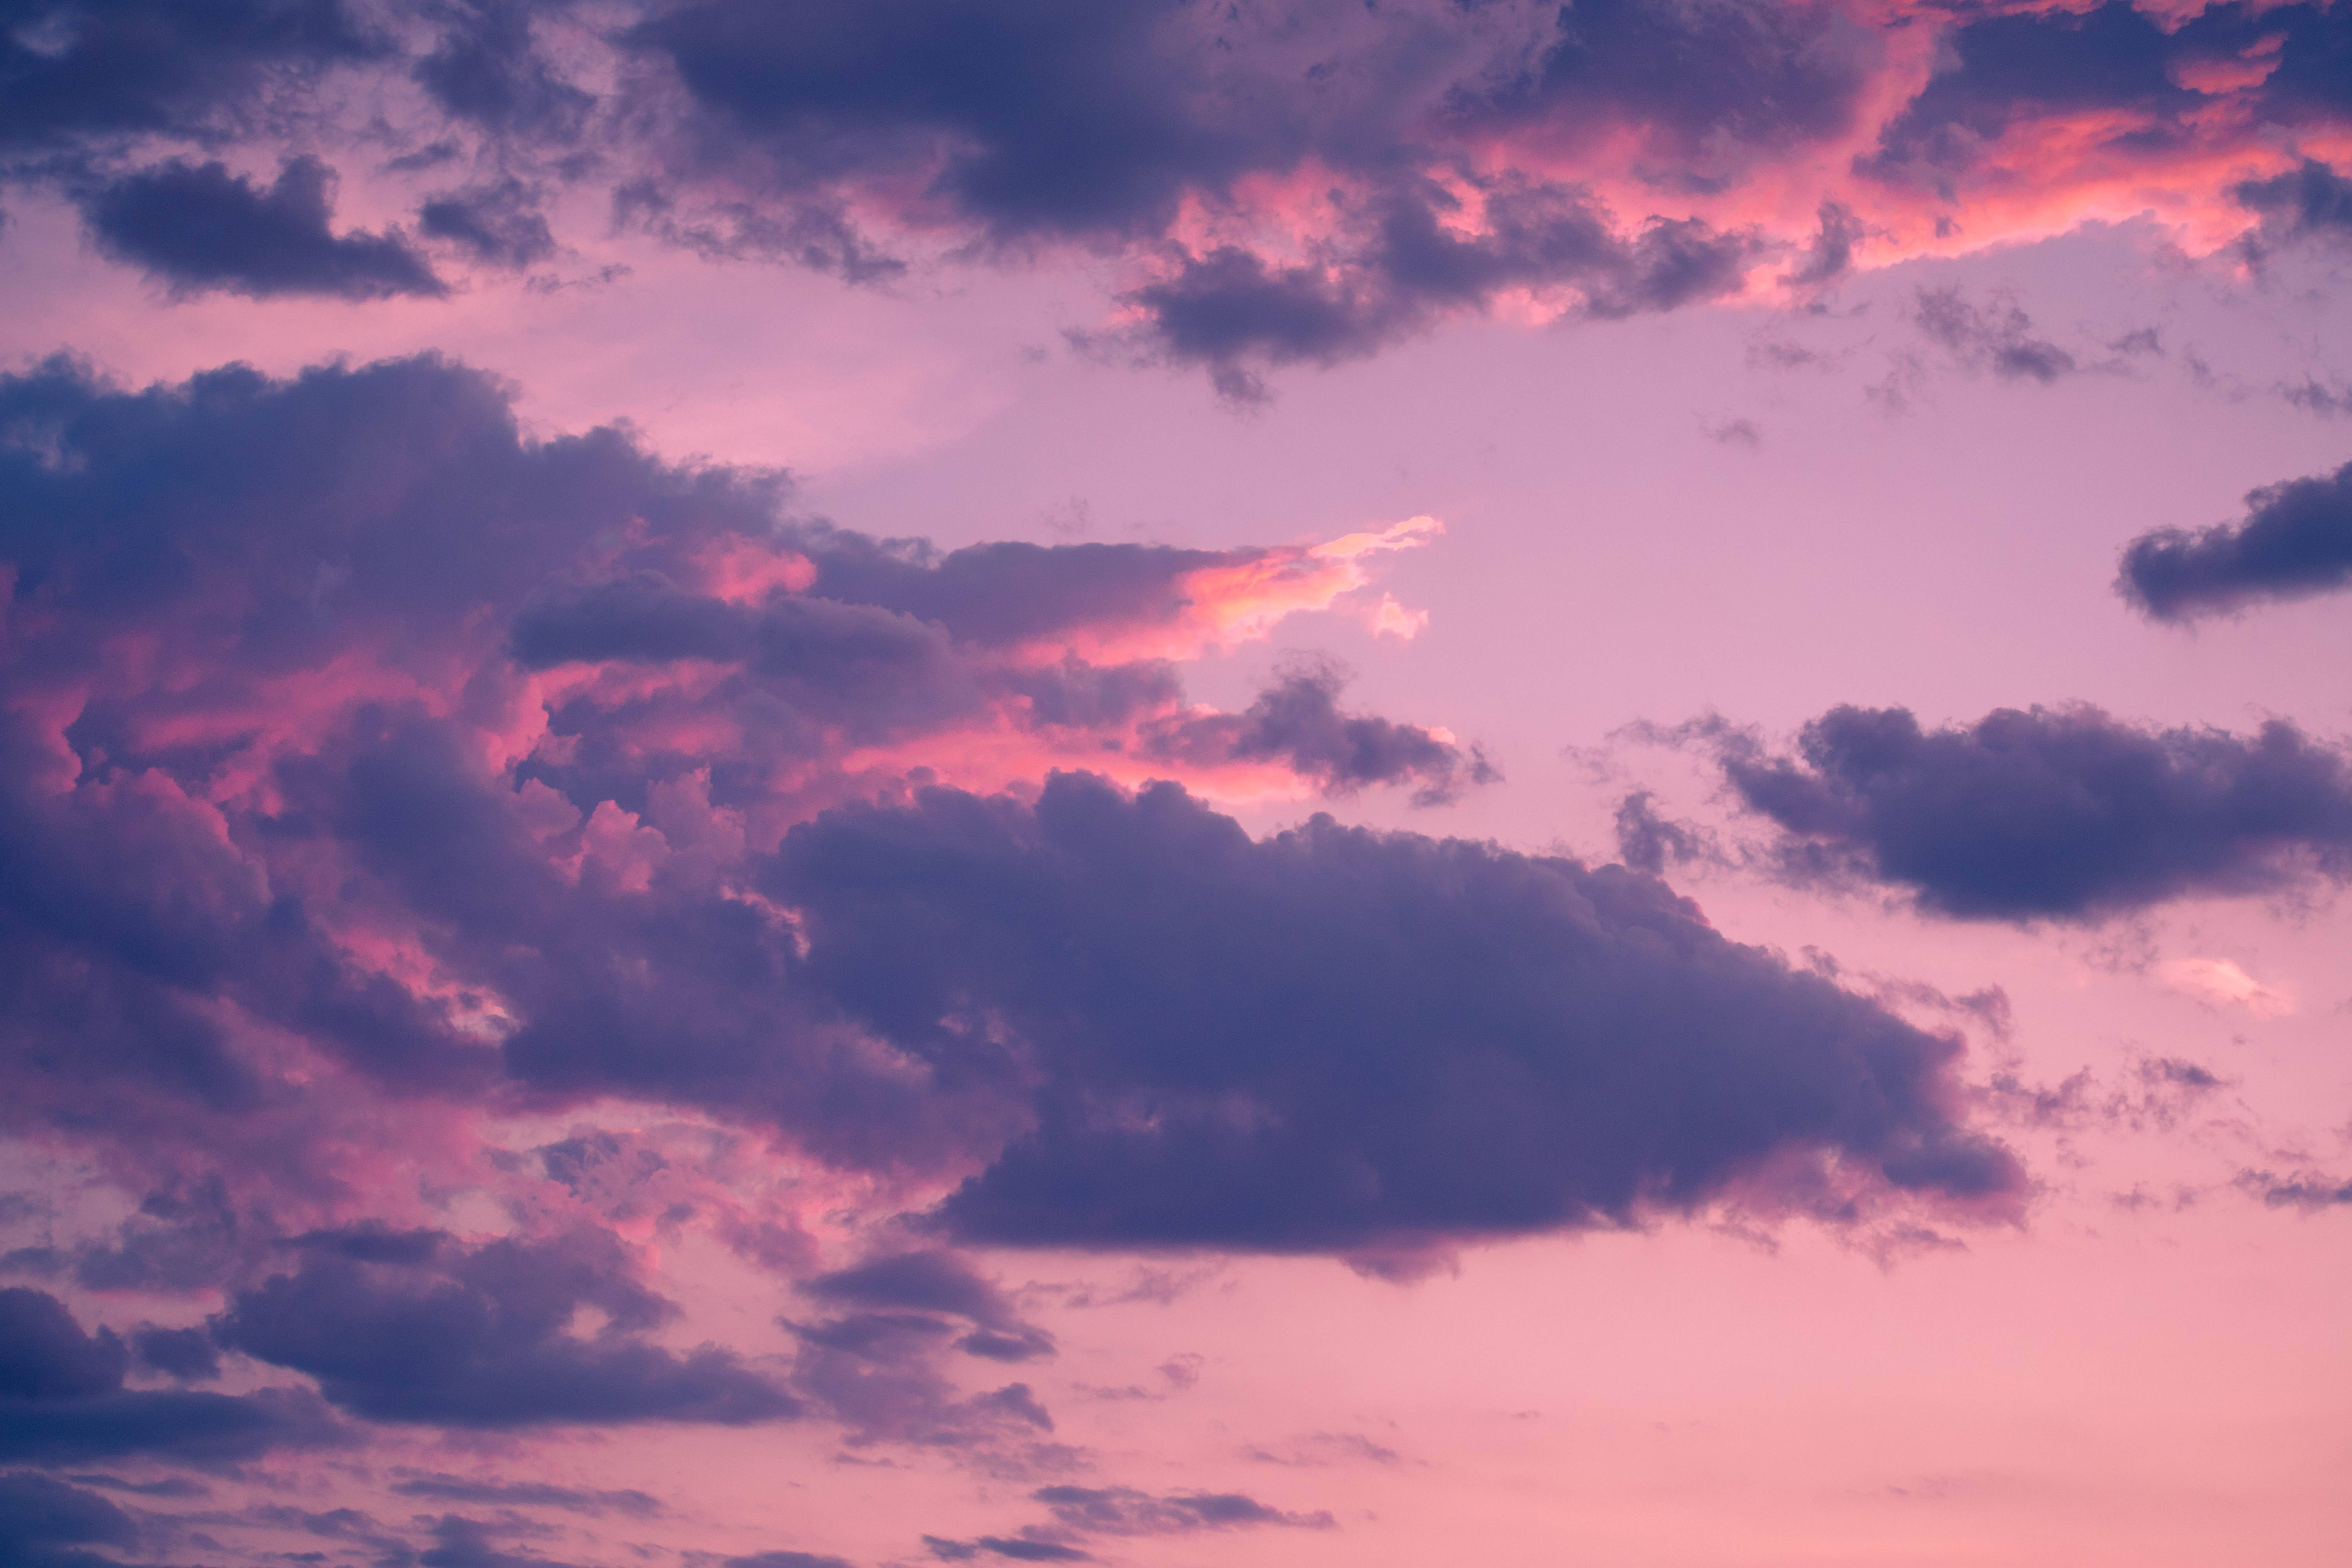 The sky during sunset with clouds of different shapes and colors. - Cloud